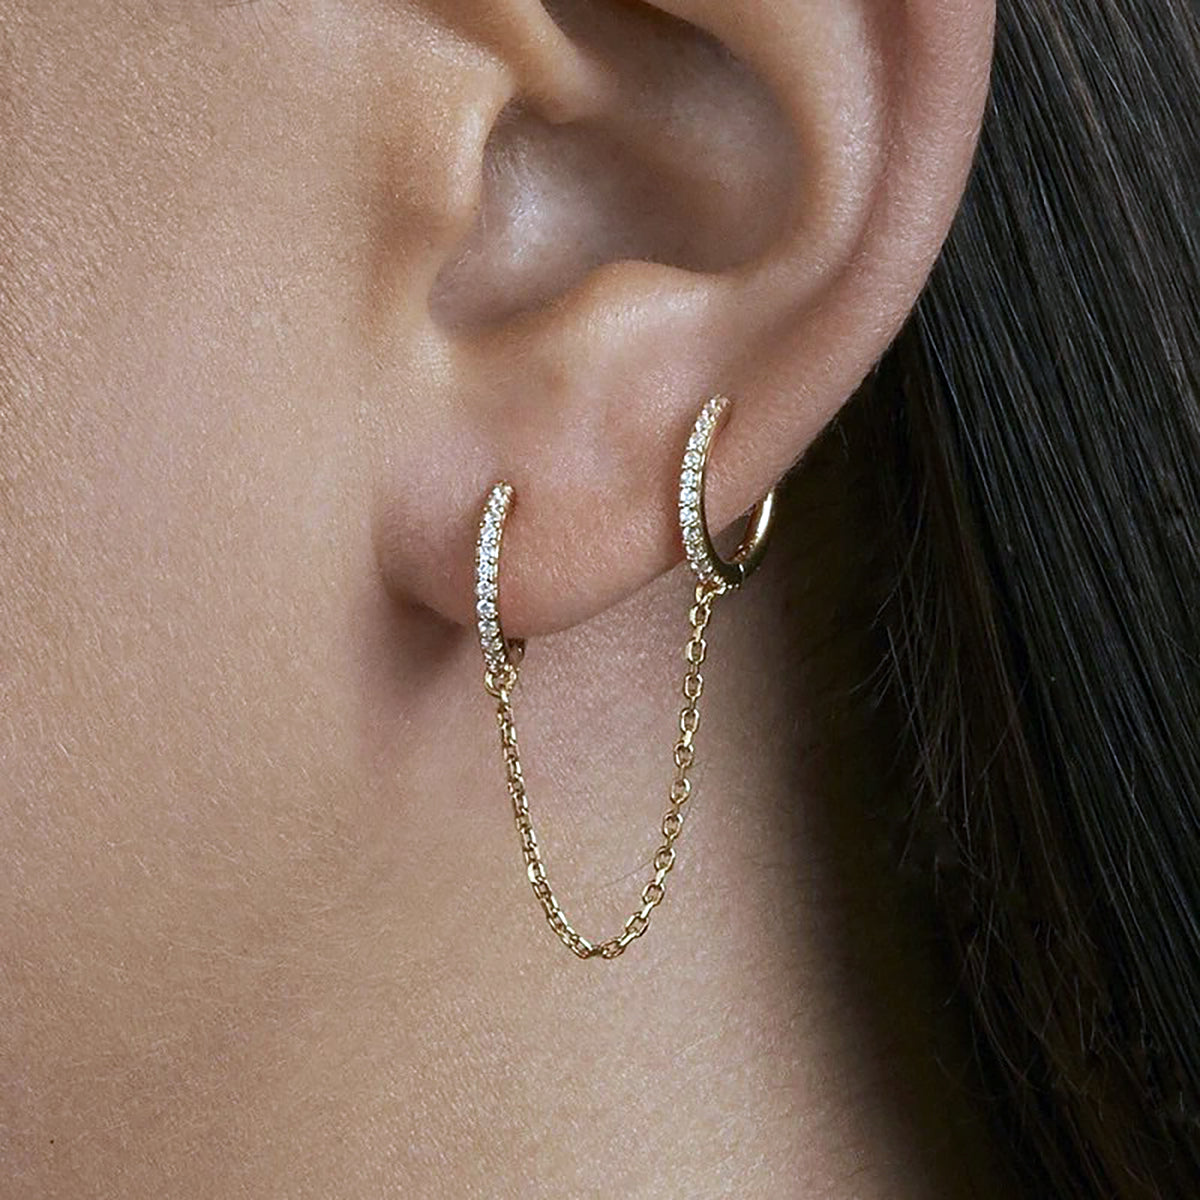 Two silver hoop earrings with multi-zircons and chain